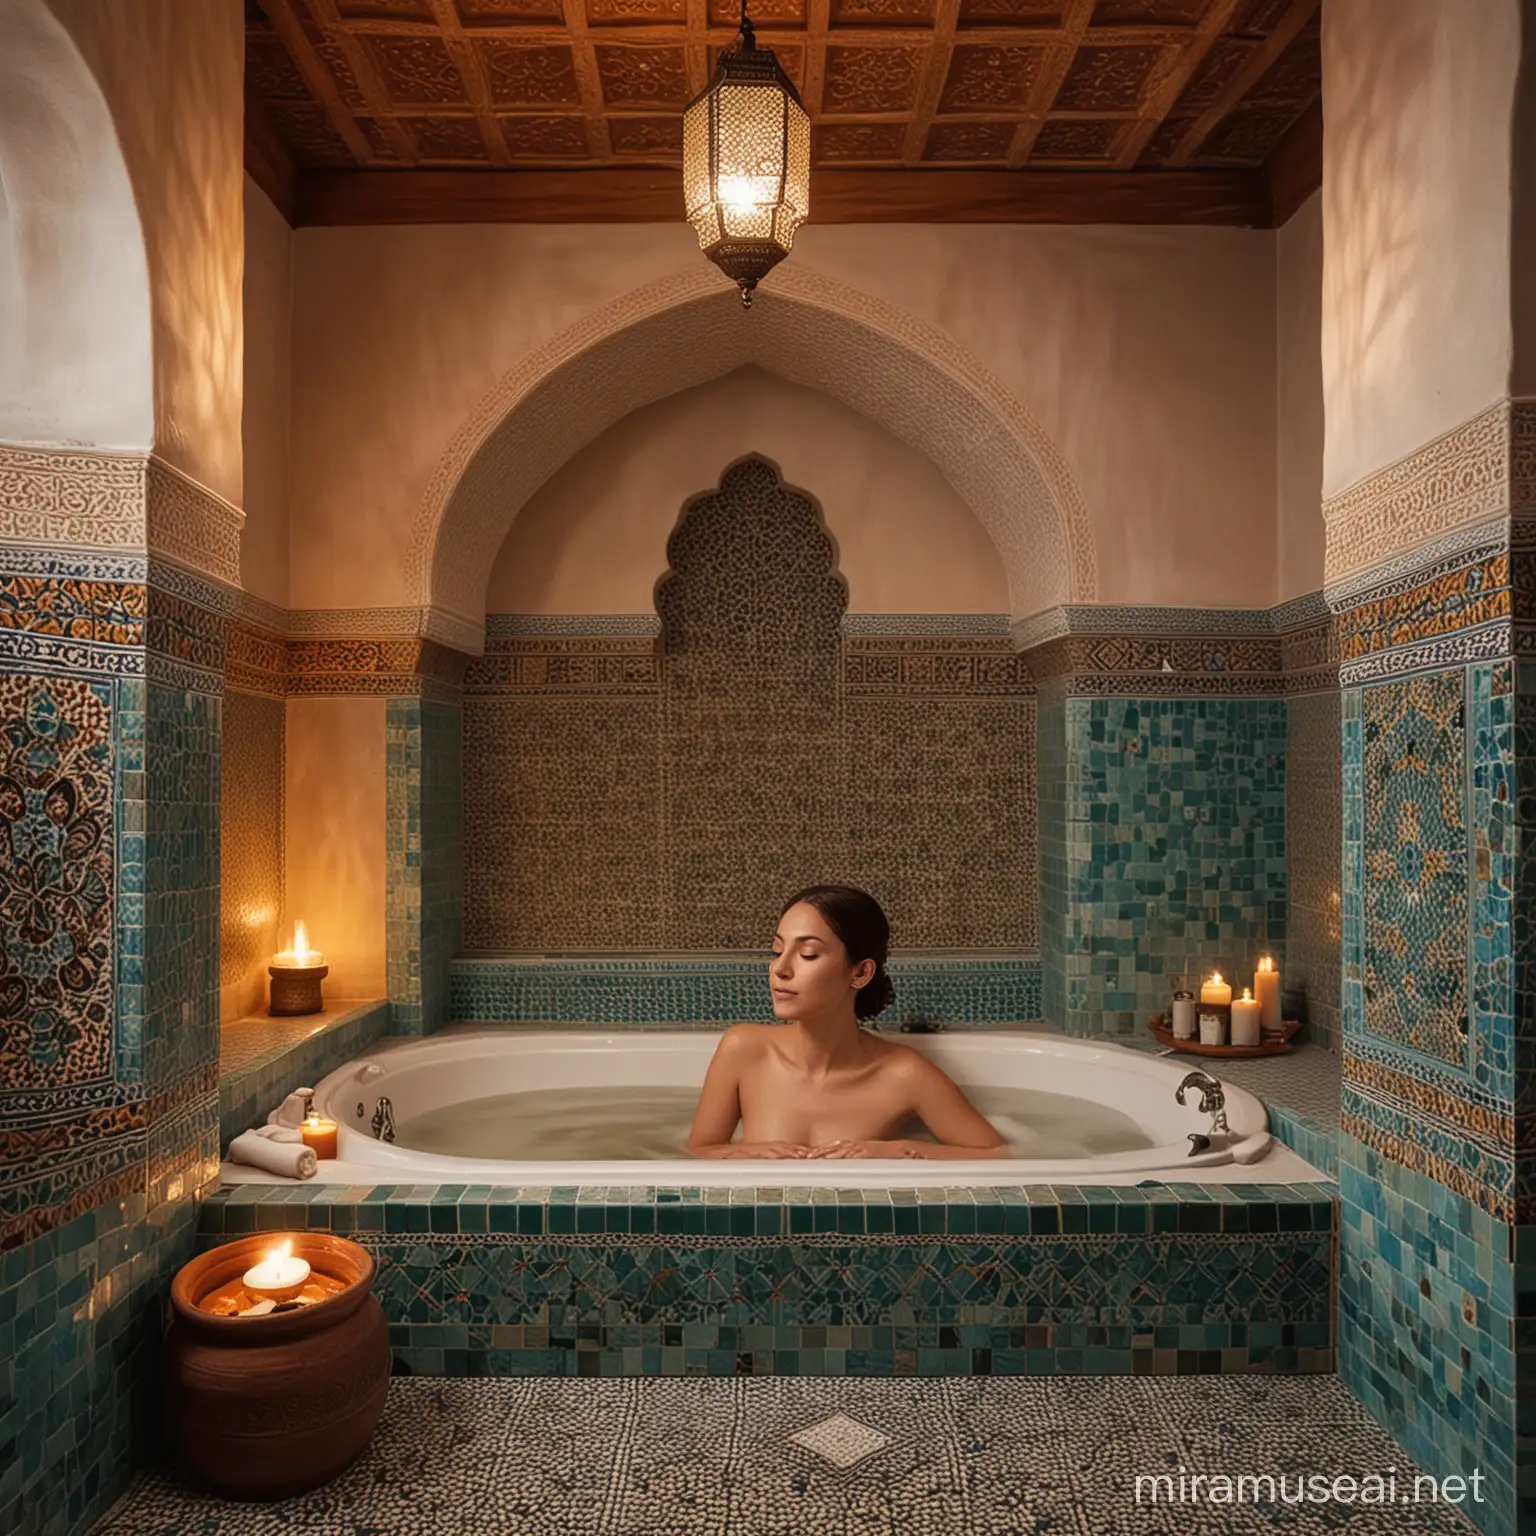 Craft an AI-generated image showcasing the serene ambiance of a traditional Moroccan bathhouse, focusing on a close-up scene of a woman luxuriating in a beautifully adorned bathtub. Infuse the scene with rich cultural elements such as ornate tiles, intricate mosaics, and soft, diffused lighting to evoke the immersive experience of a Moroccan bath. Capture the essence of relaxation, rejuvenation, and cultural tradition in this captivating visual narrative.